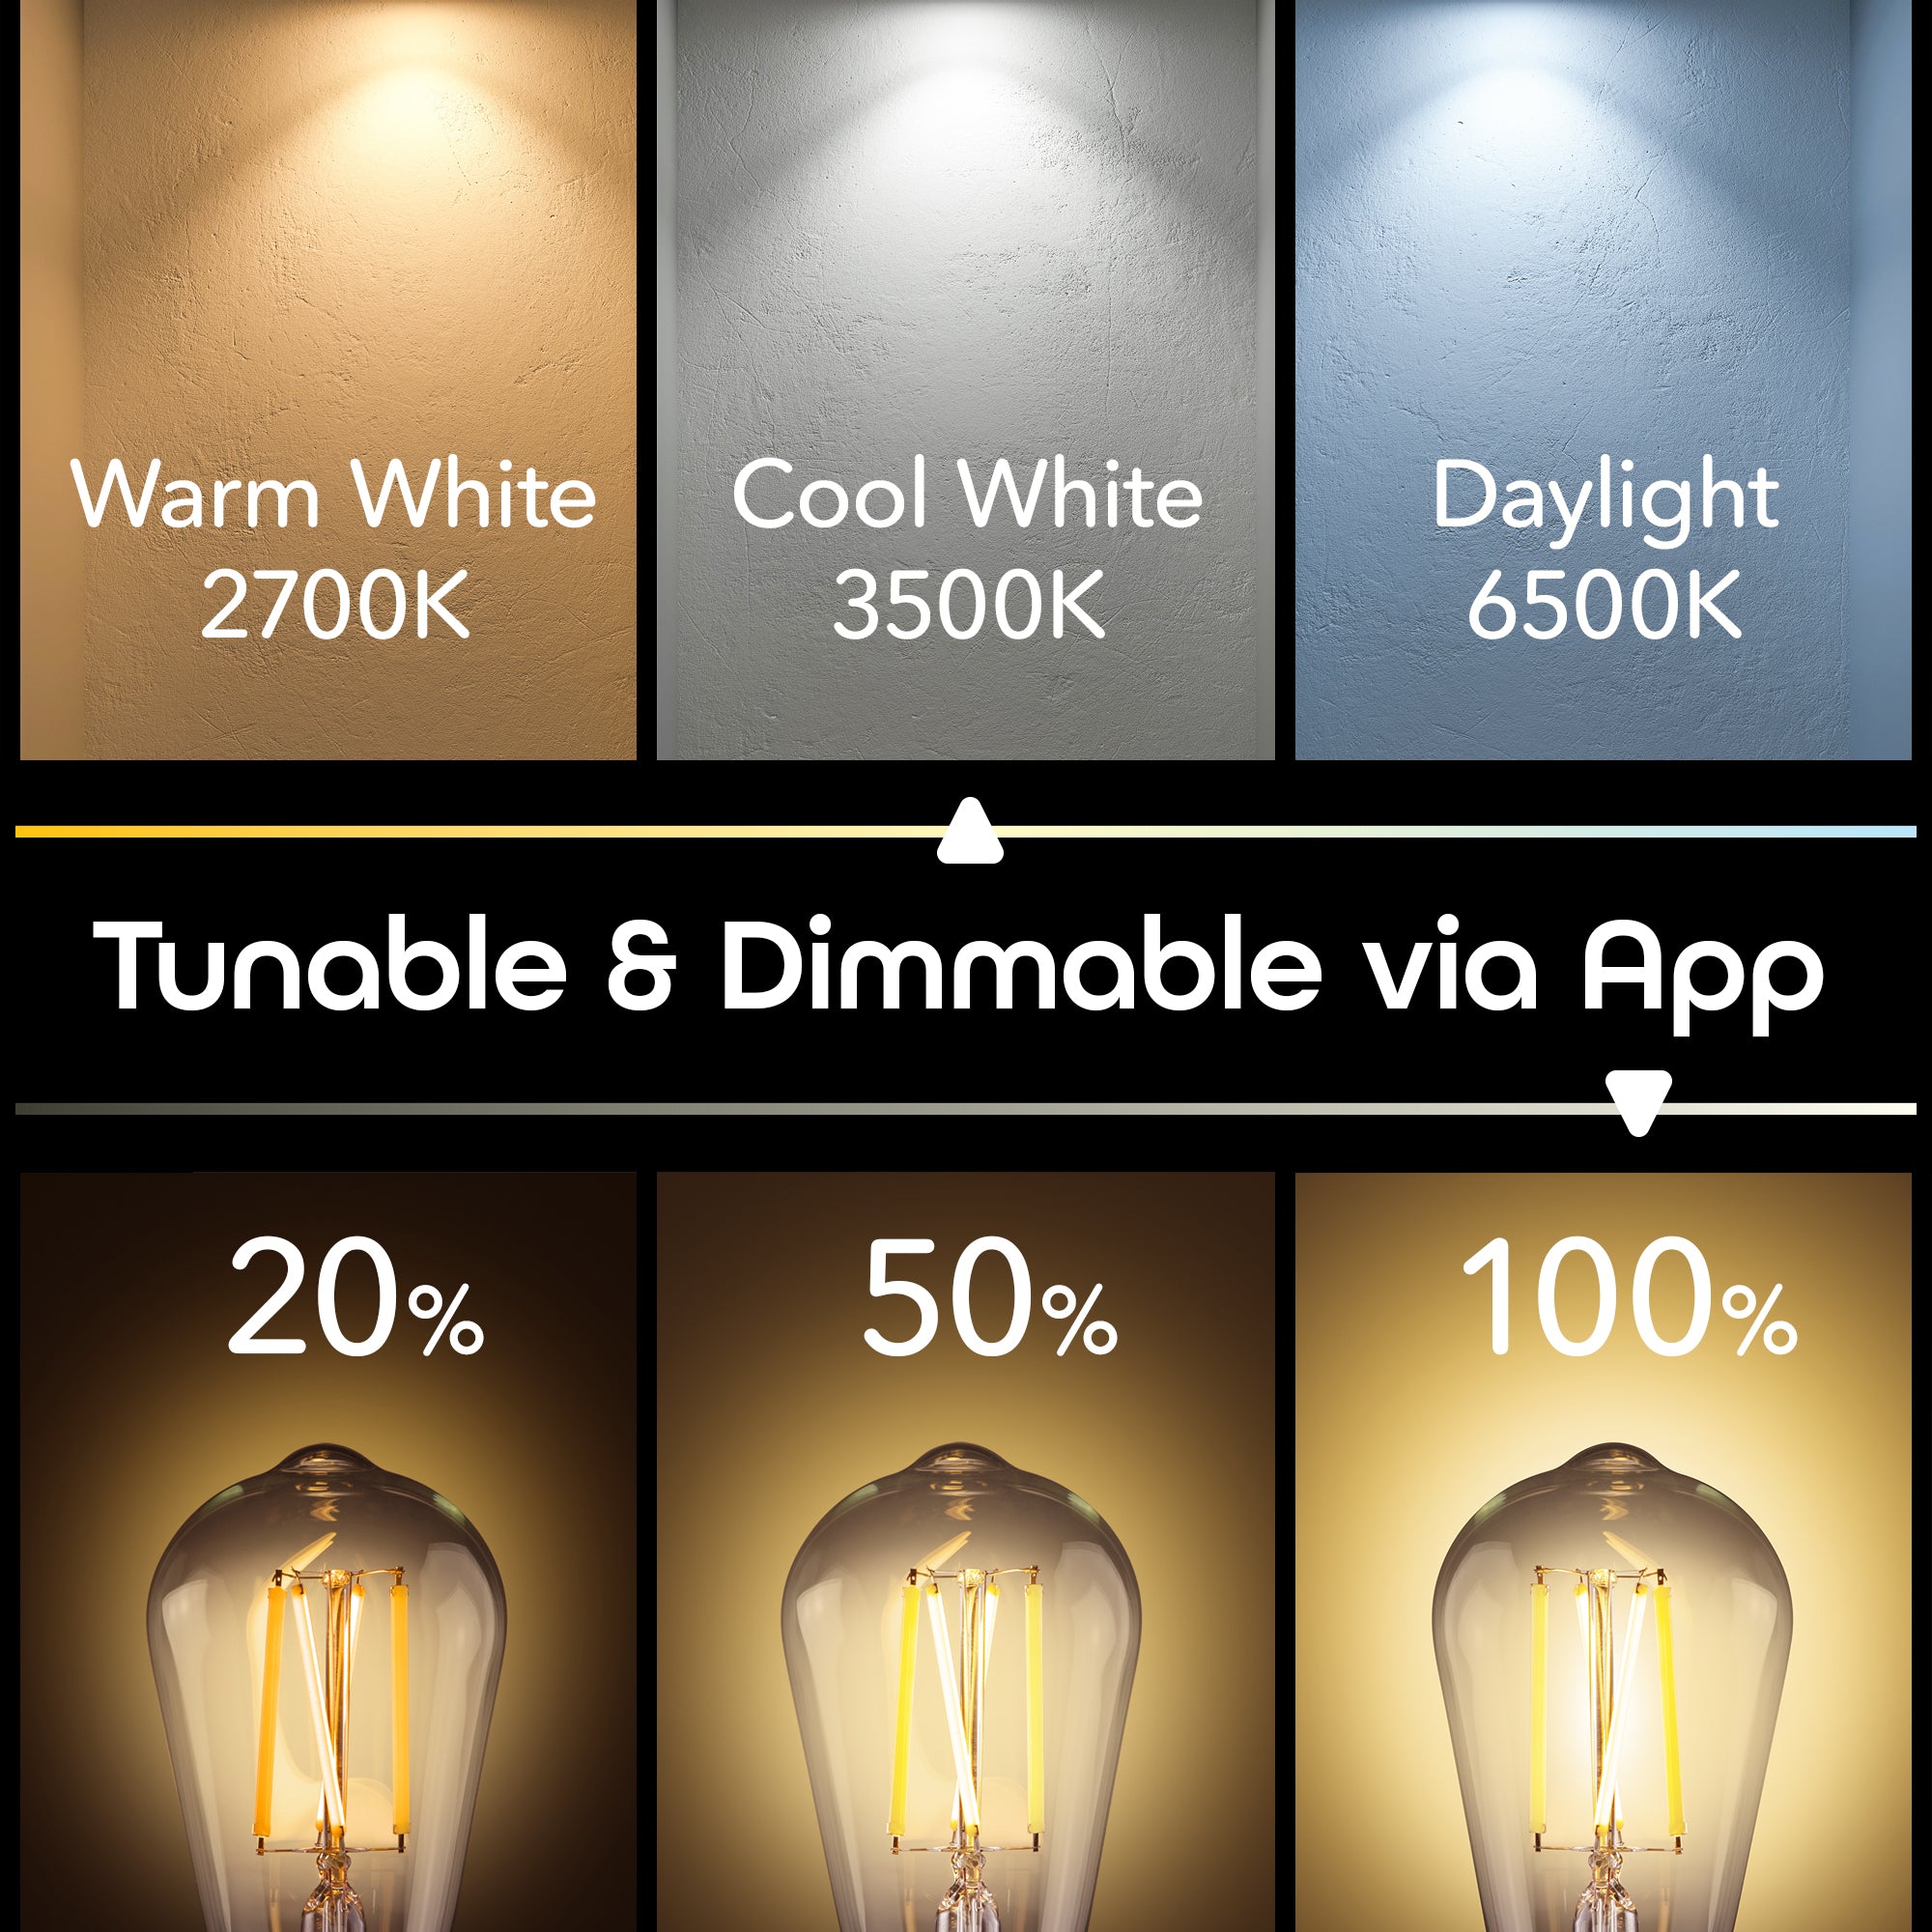 Geeni Lux Edison ST21 Smart Bulb - Tunable White (4-Pack)